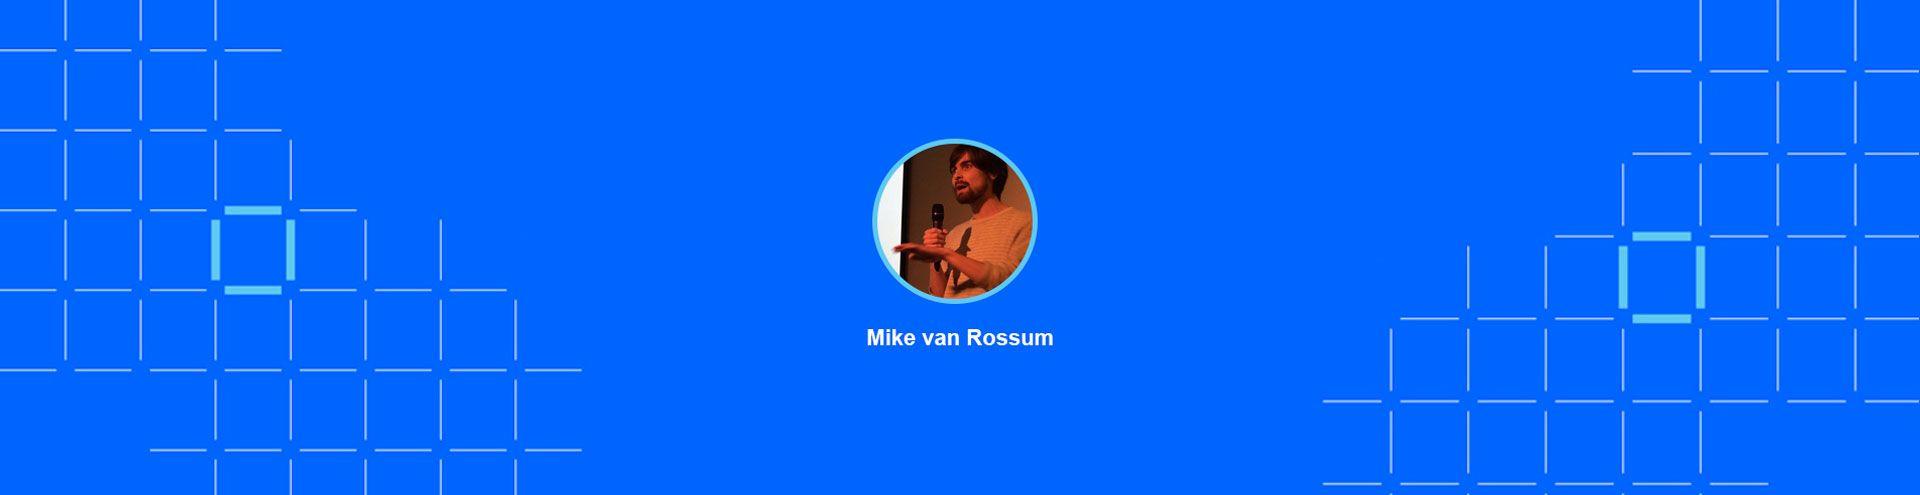 Interview with Mike van Rossum, the Author of Gekko, a Bitcoin Trading Bot